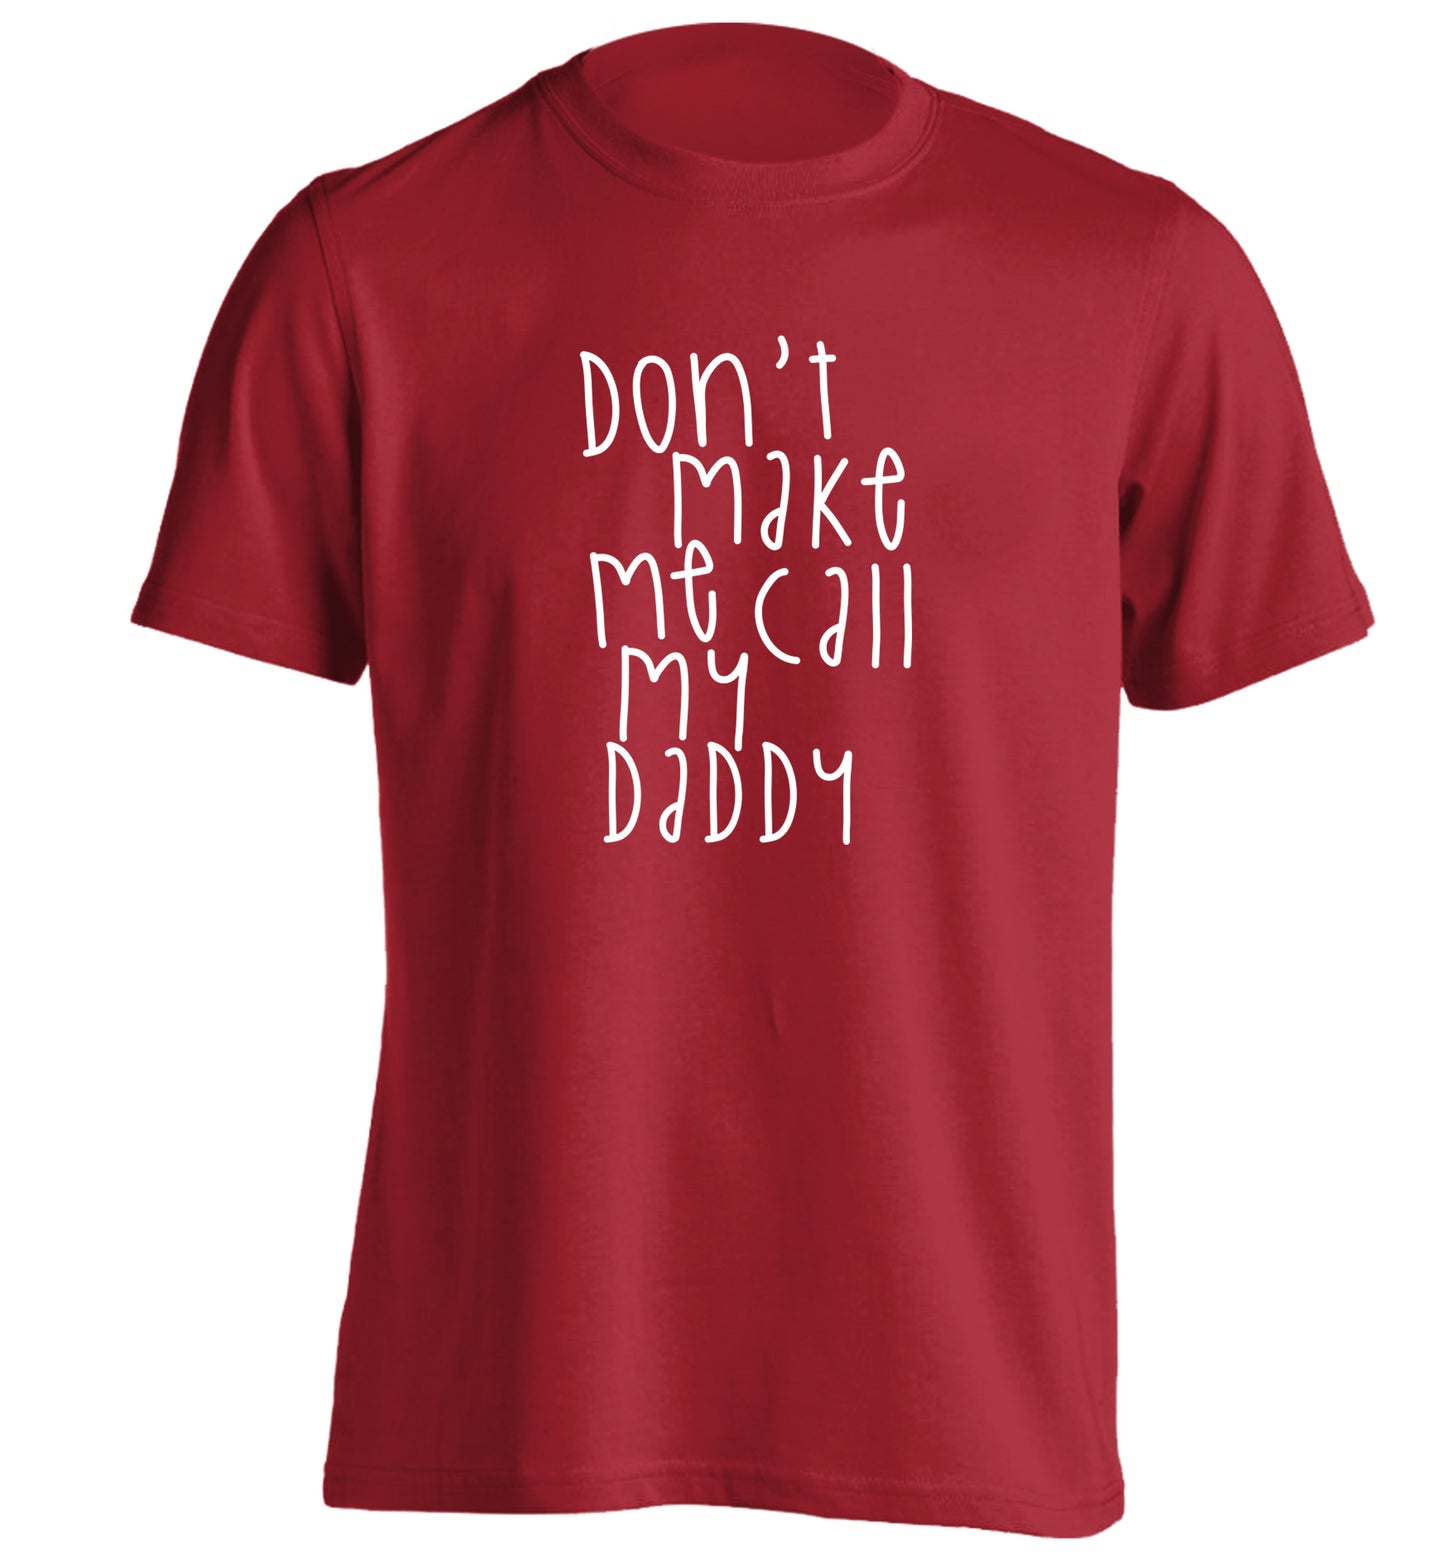 Don't make me call my daddy adults unisex red Tshirt 2XL